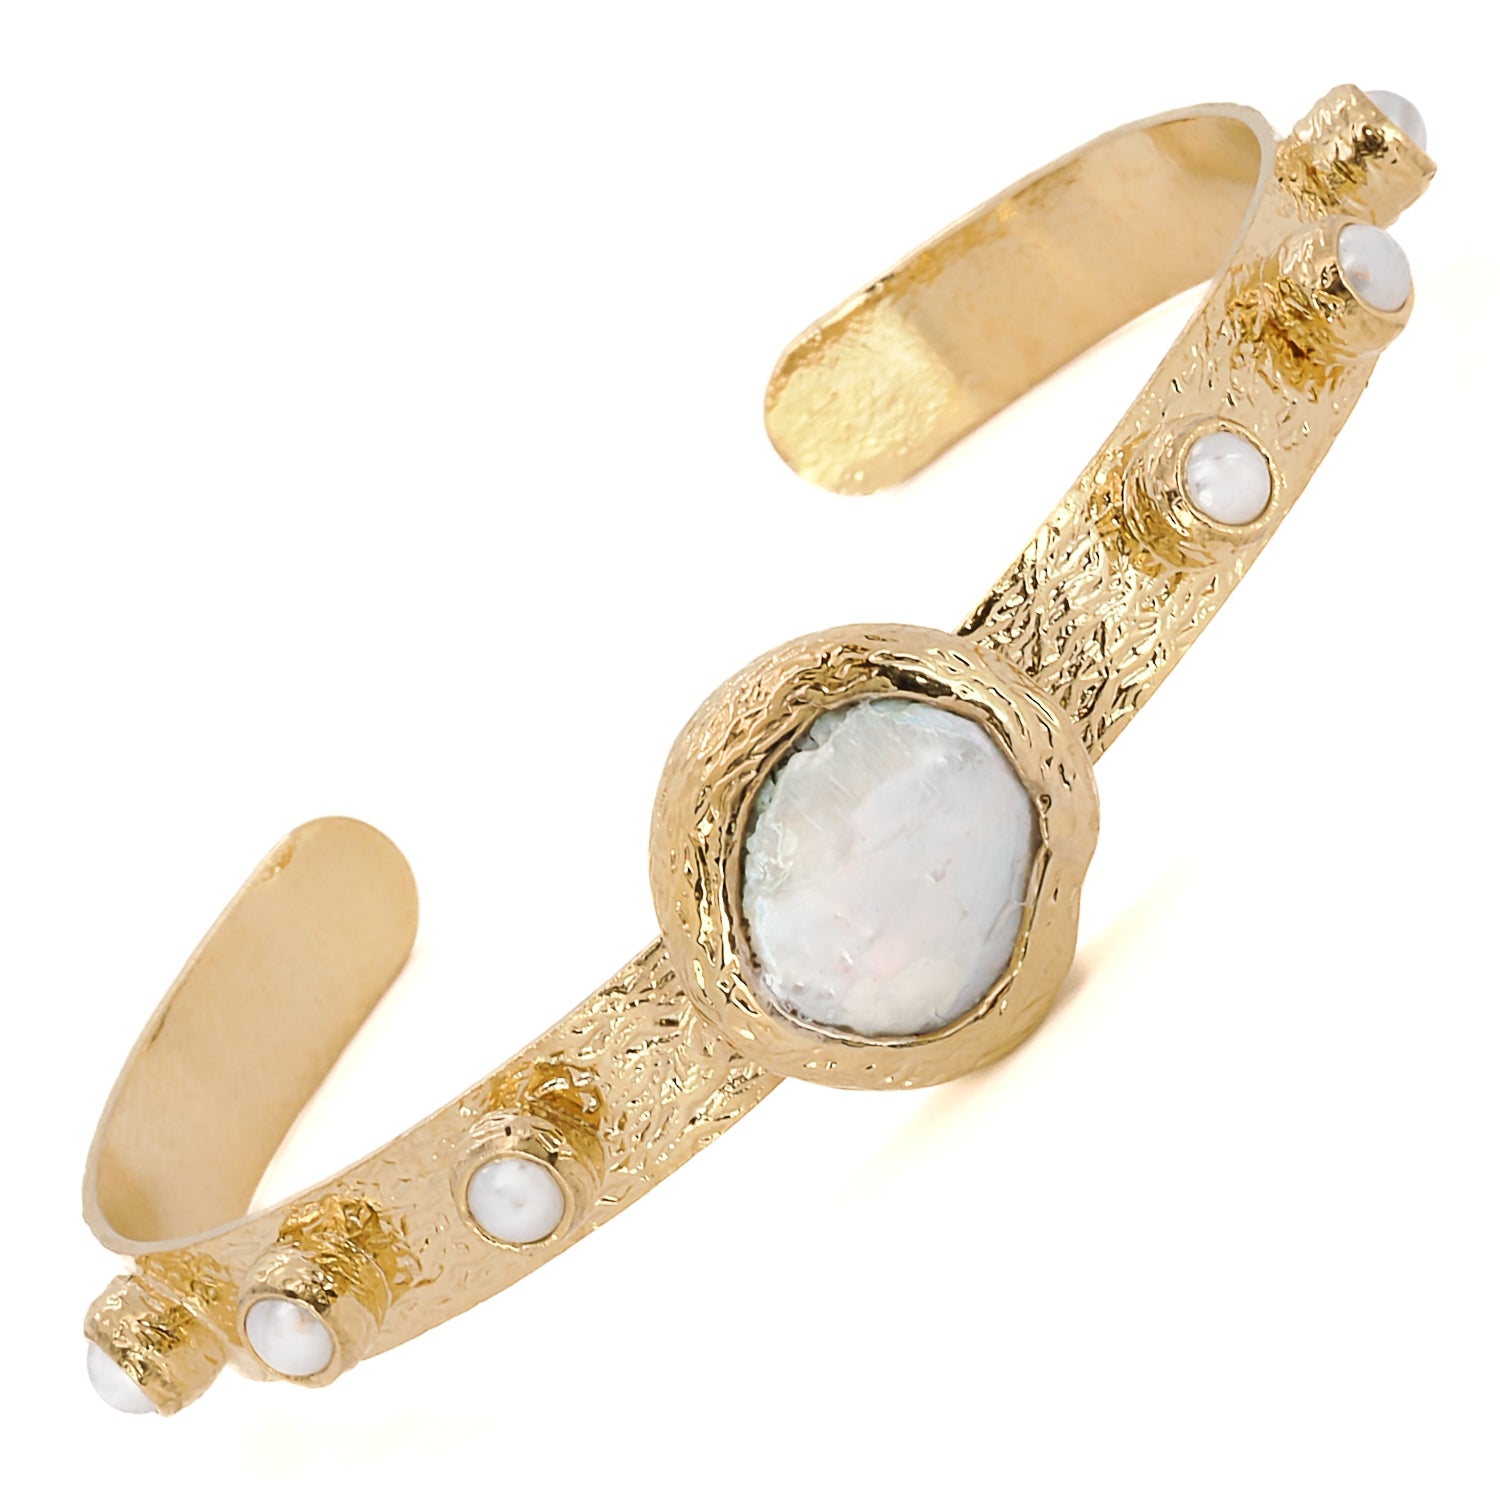 Ethereal beauty captured in the Cleopatra Pearl Cuff Bracelet.